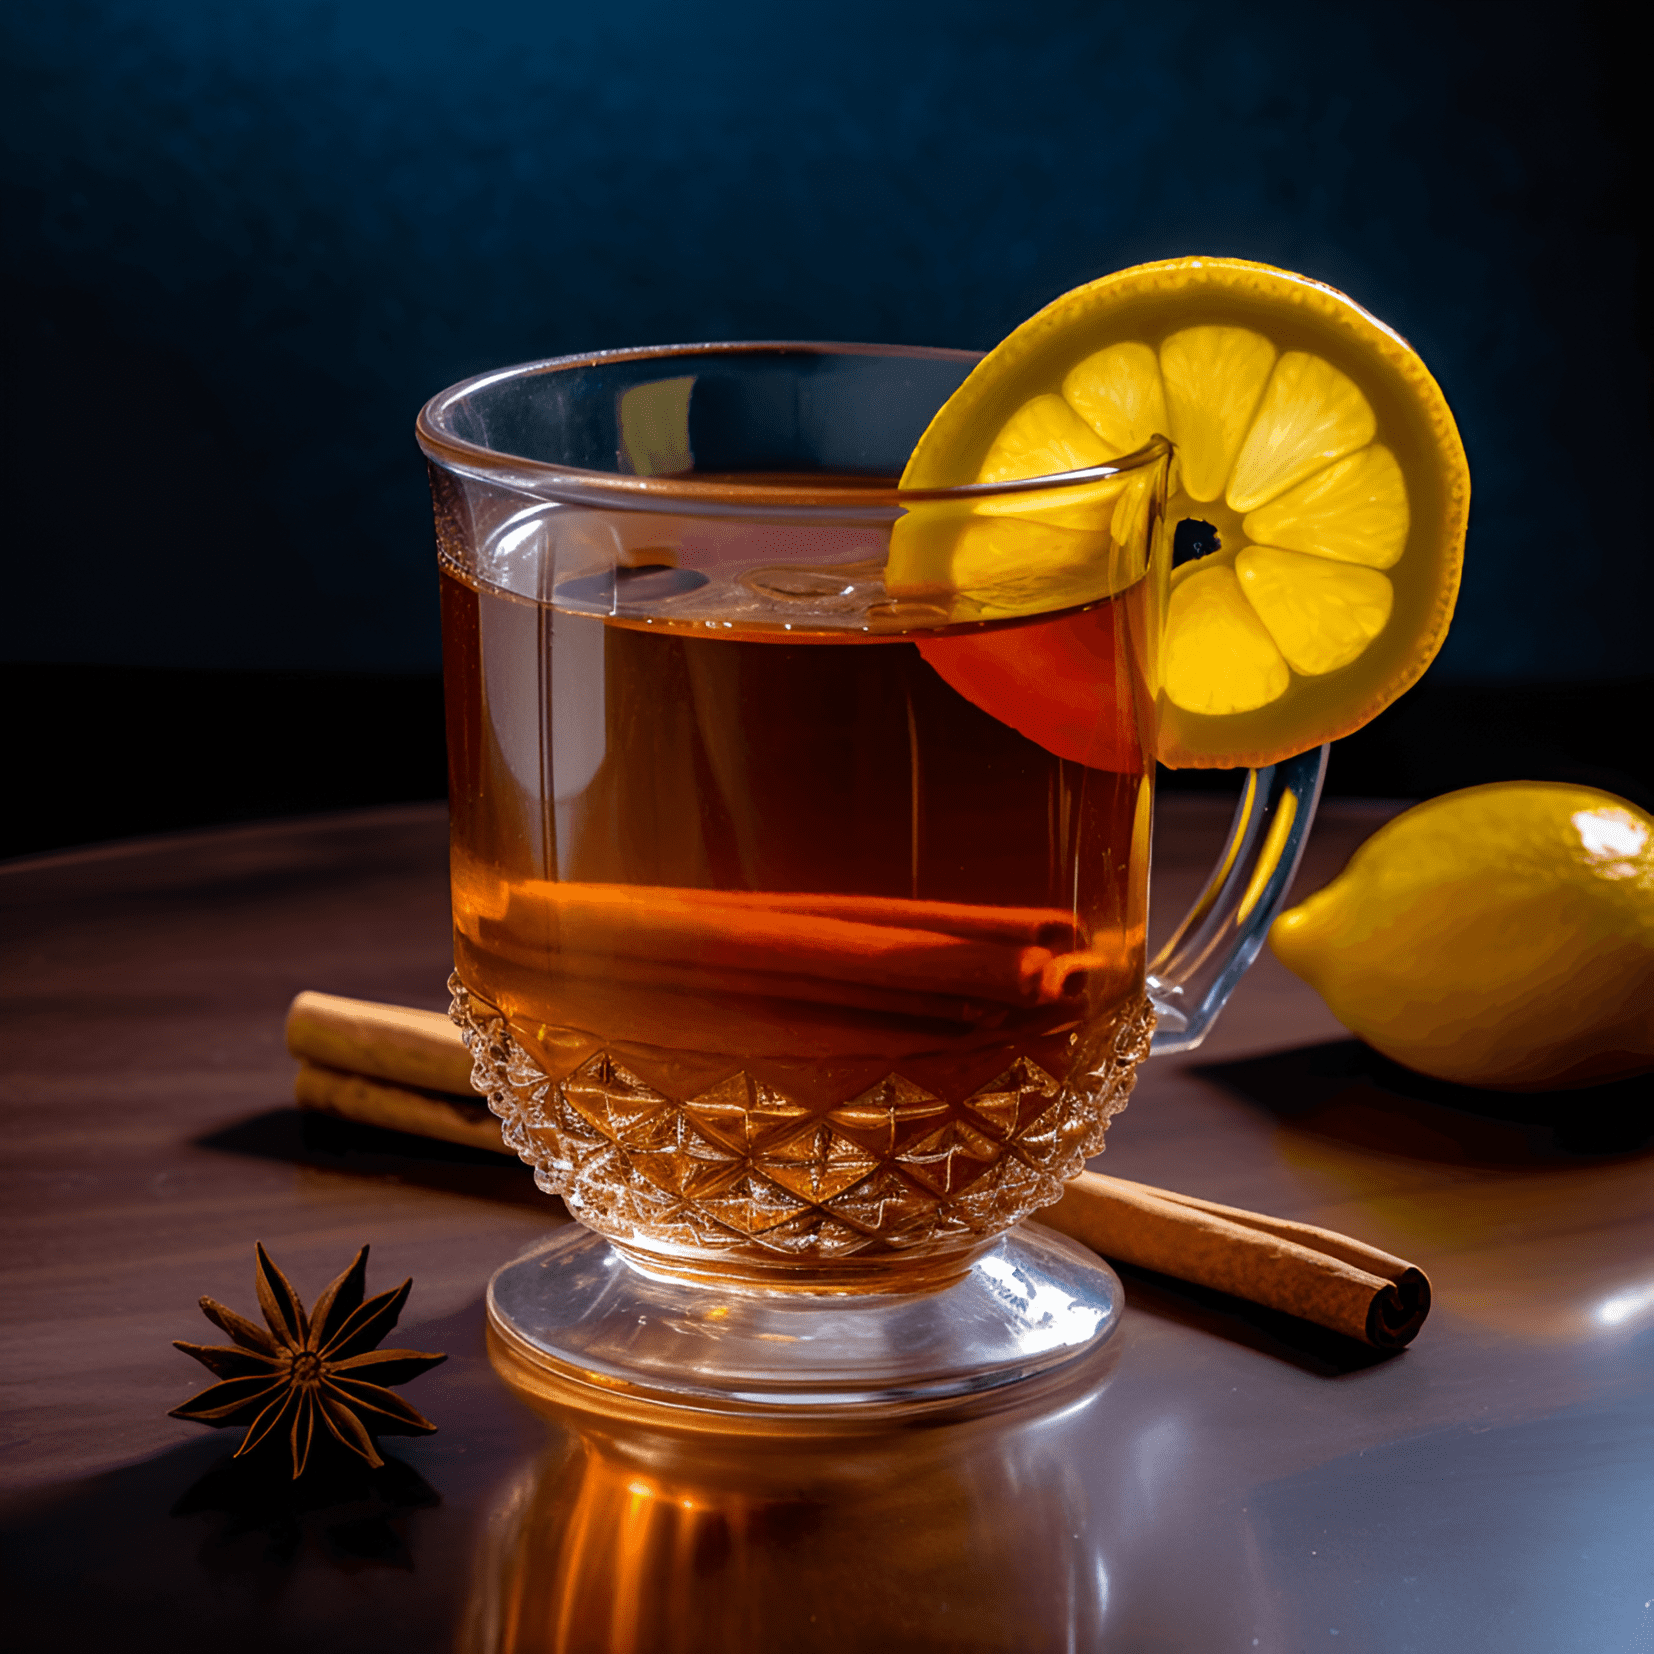 Gunfire Cocktail Recipe - The Gunfire cocktail has a warm, robust, and slightly sweet taste. The strong black tea provides a bold, earthy base, while the rum adds a rich, smooth sweetness. The combination creates a comforting and invigorating drink.